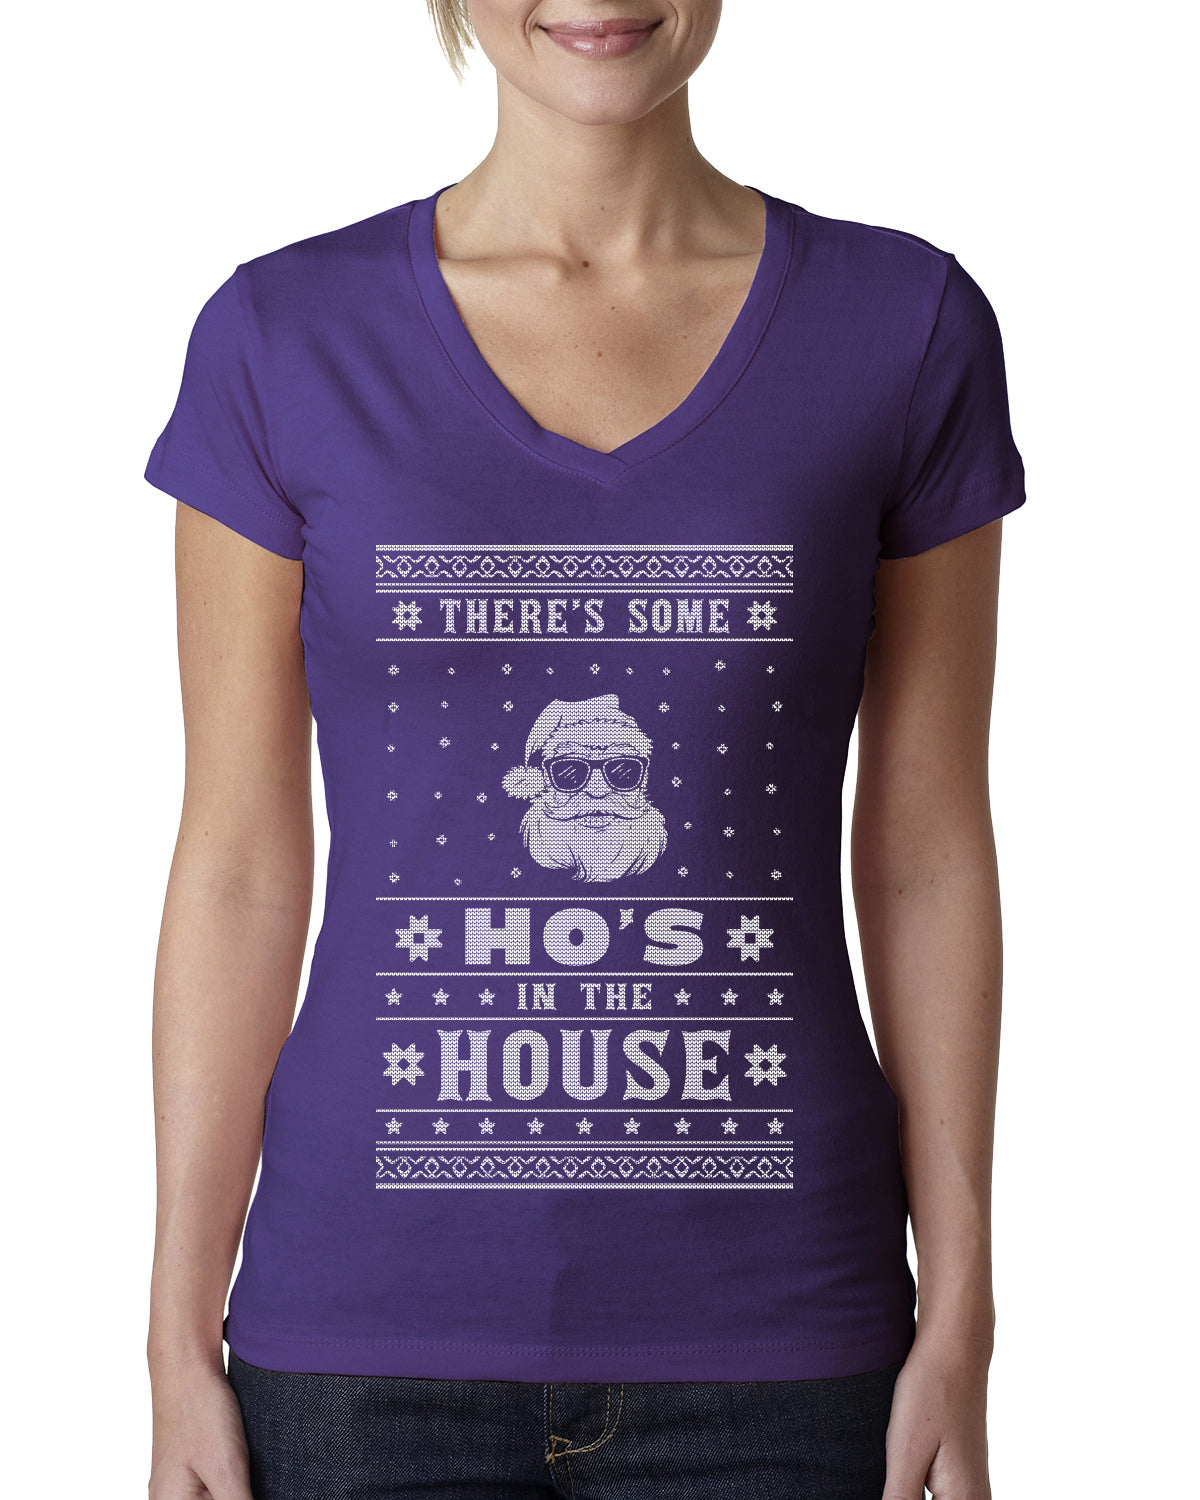 Theres Some Hos in the House Santa Ugly Christmas Sweater Womens Junior Fit V-Neck Tee